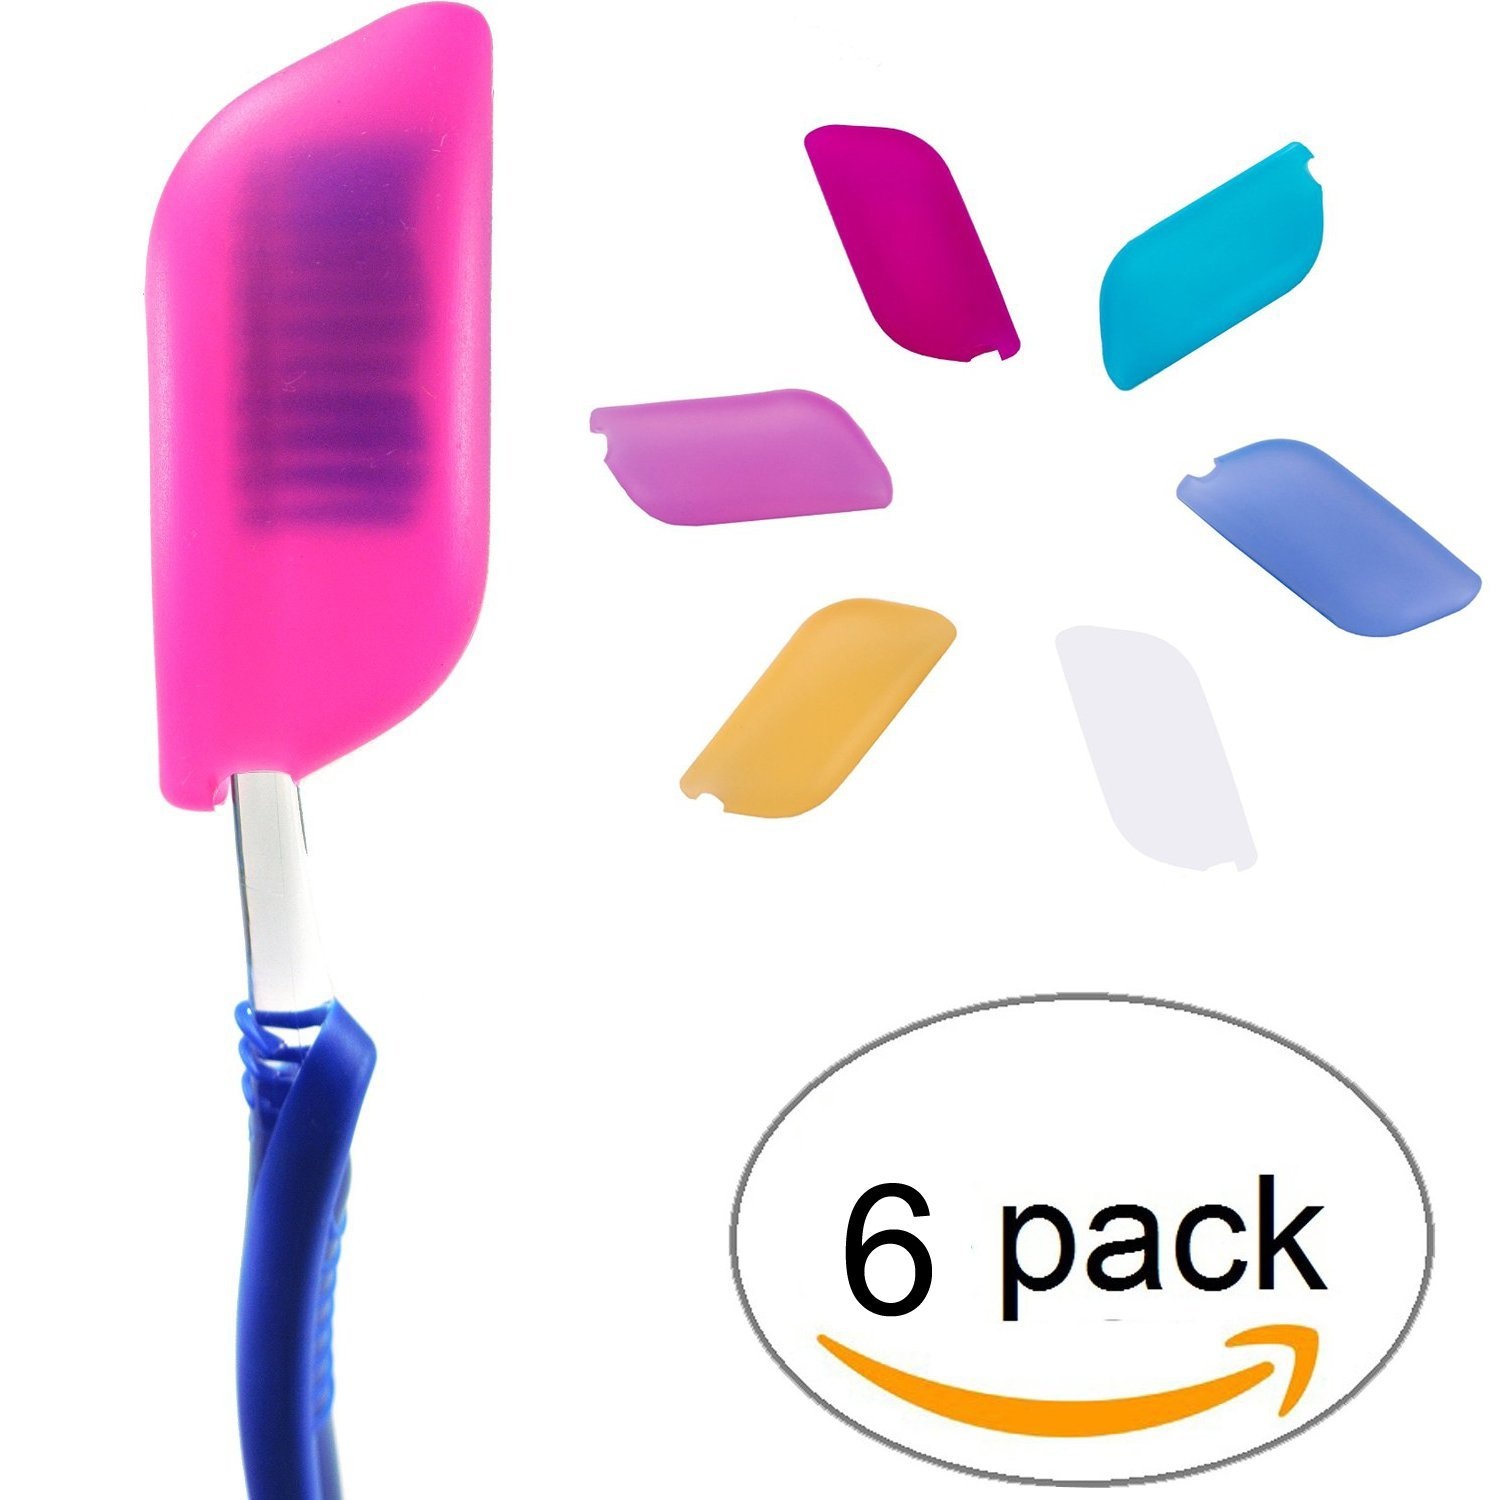 Silicone toothbrush case covers